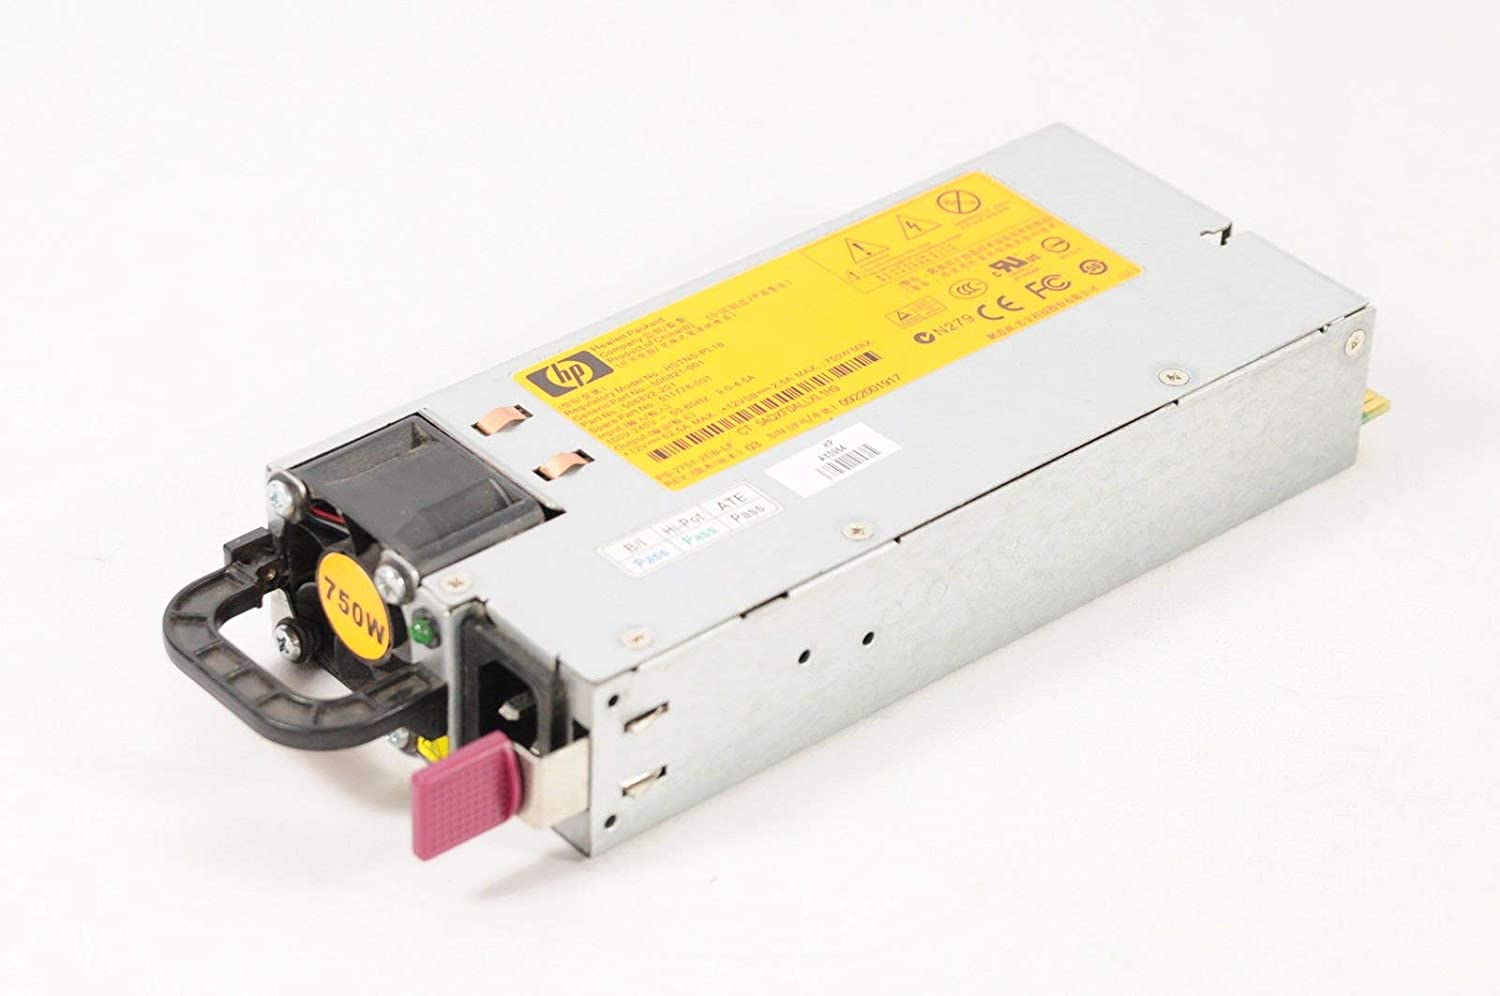 HP HSTNS-PL18 506822-201 506821-001 750W power supply for G6 G7 PS-2751-2CB-LF 718272169966